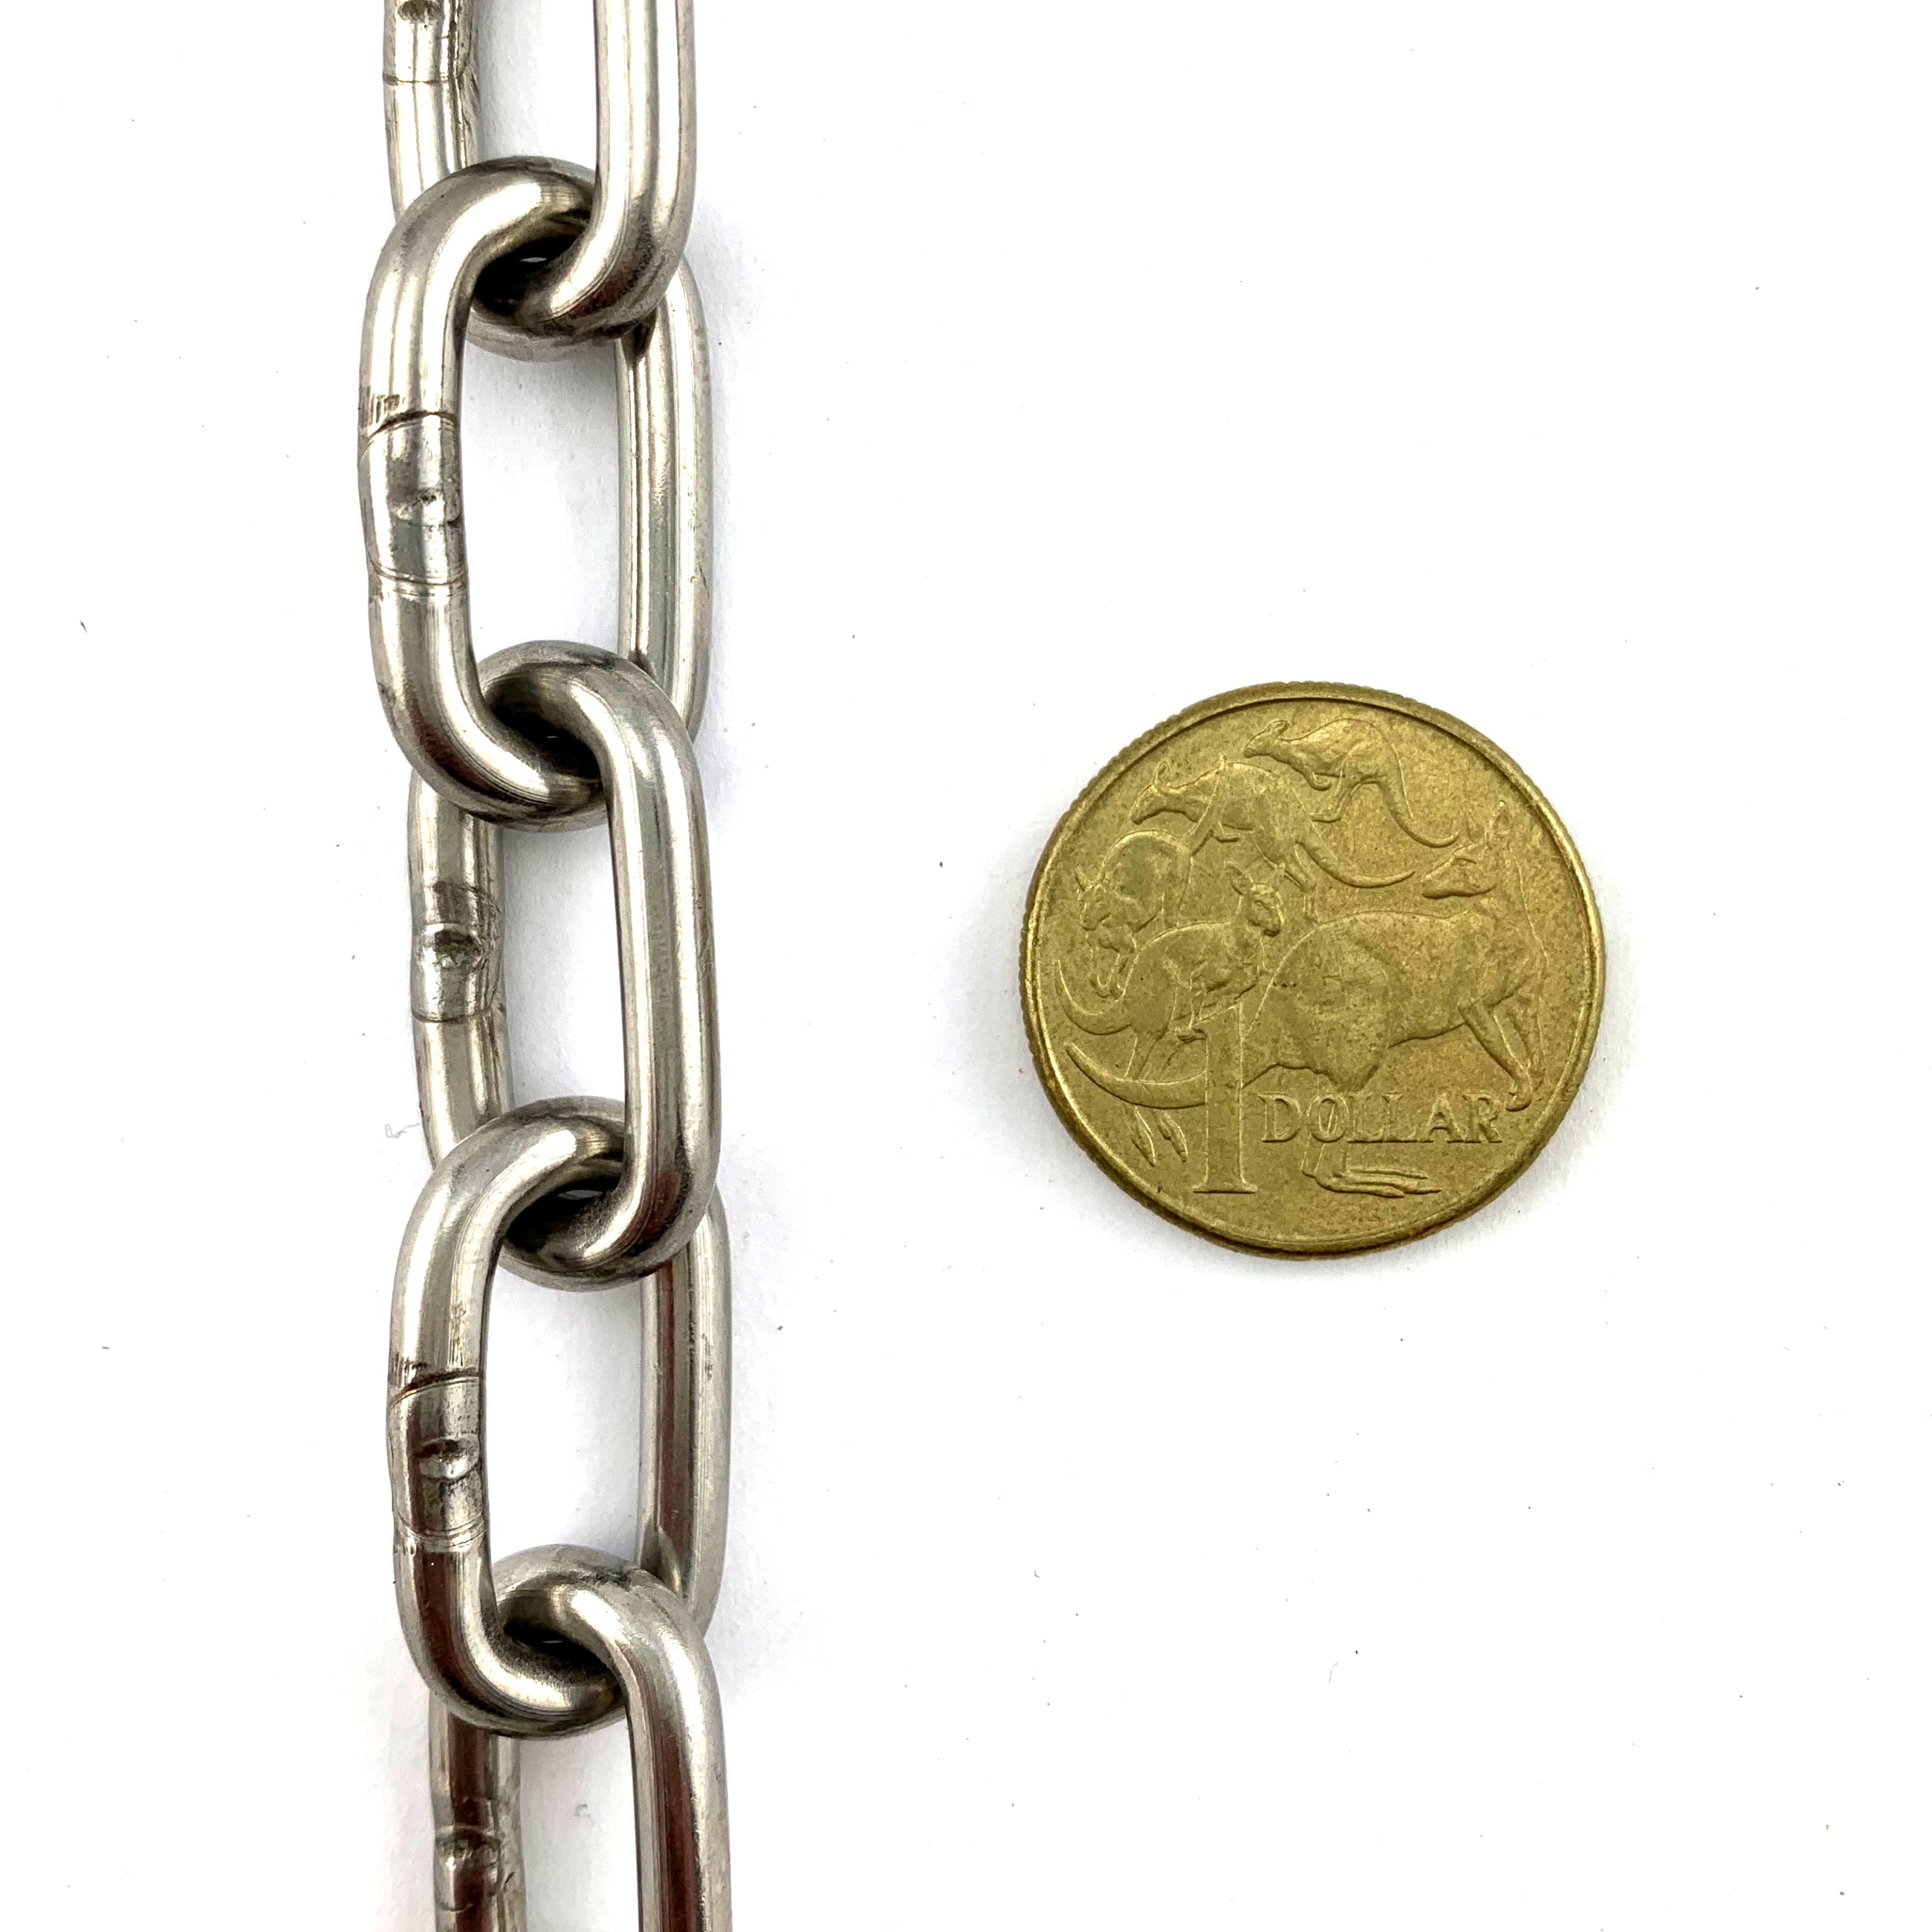 4mm Welded Link Chain in type 316 Marine Grade Stainless Steel. Chain by the metre. Australia wide delivery.